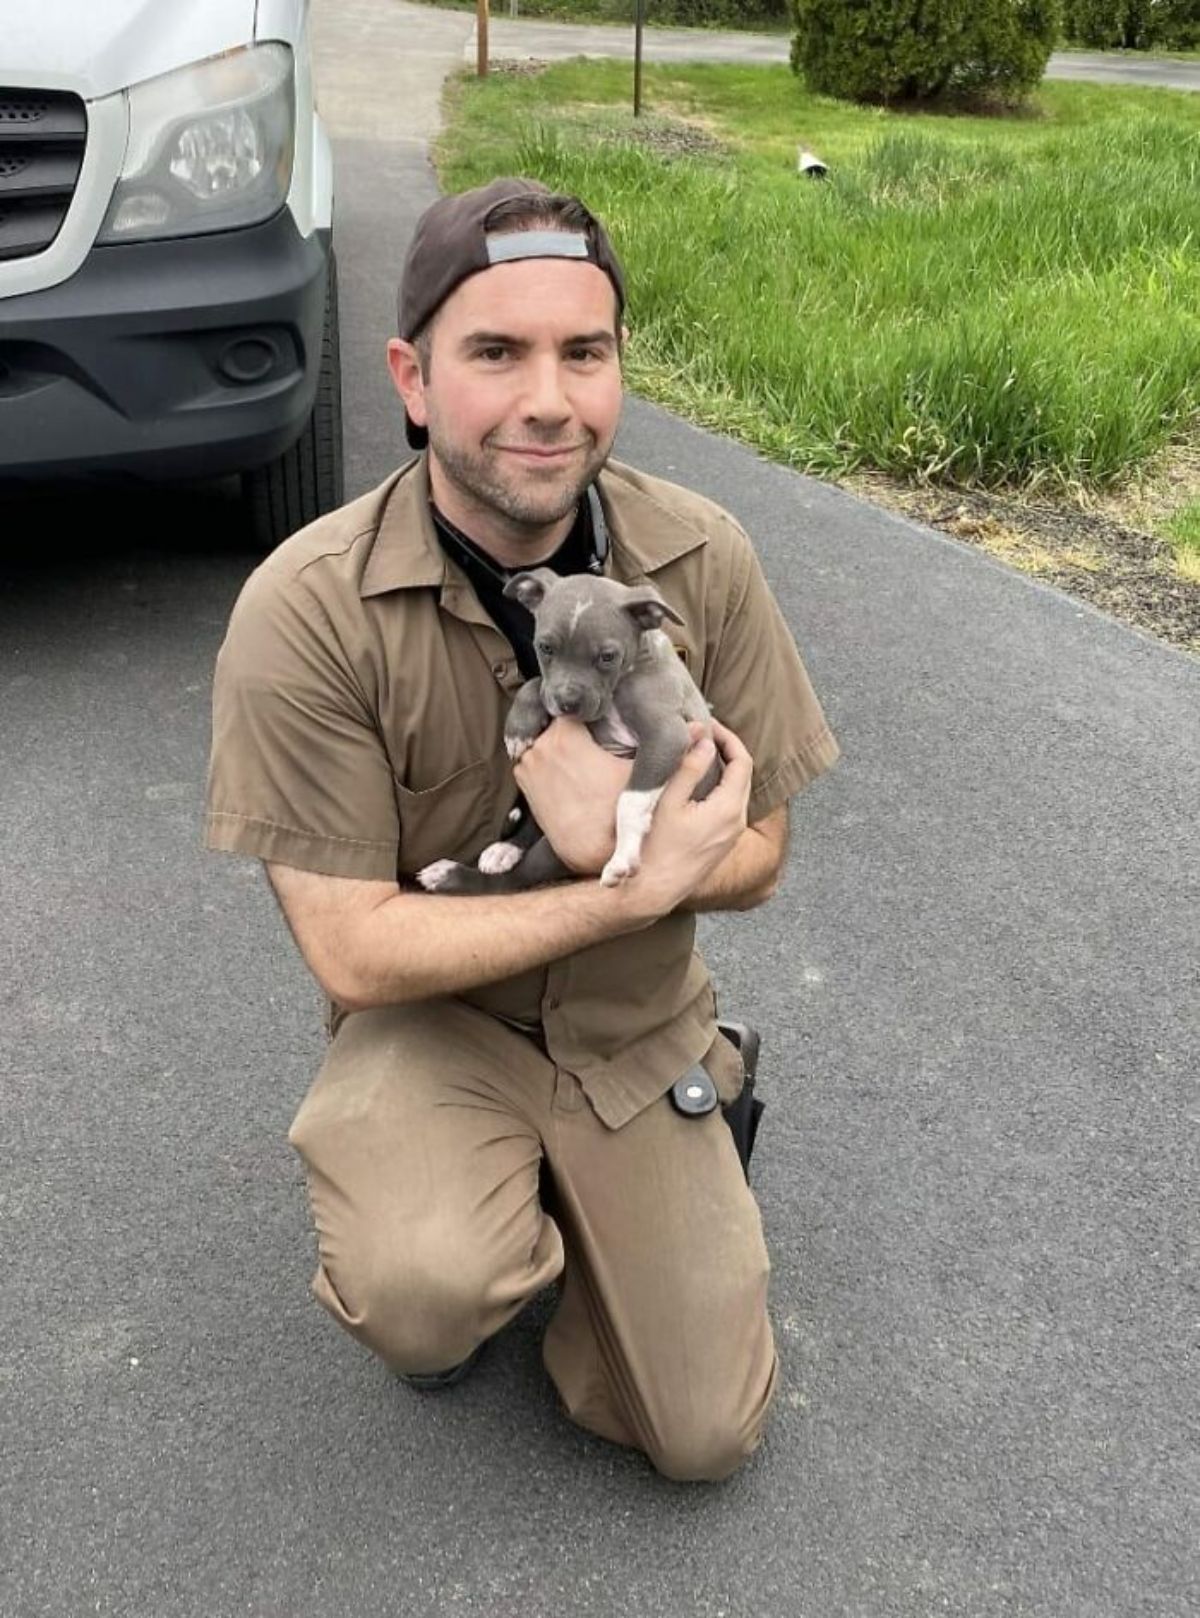 male ups driver kneeling on the road holding a grey and white pitbull puppy